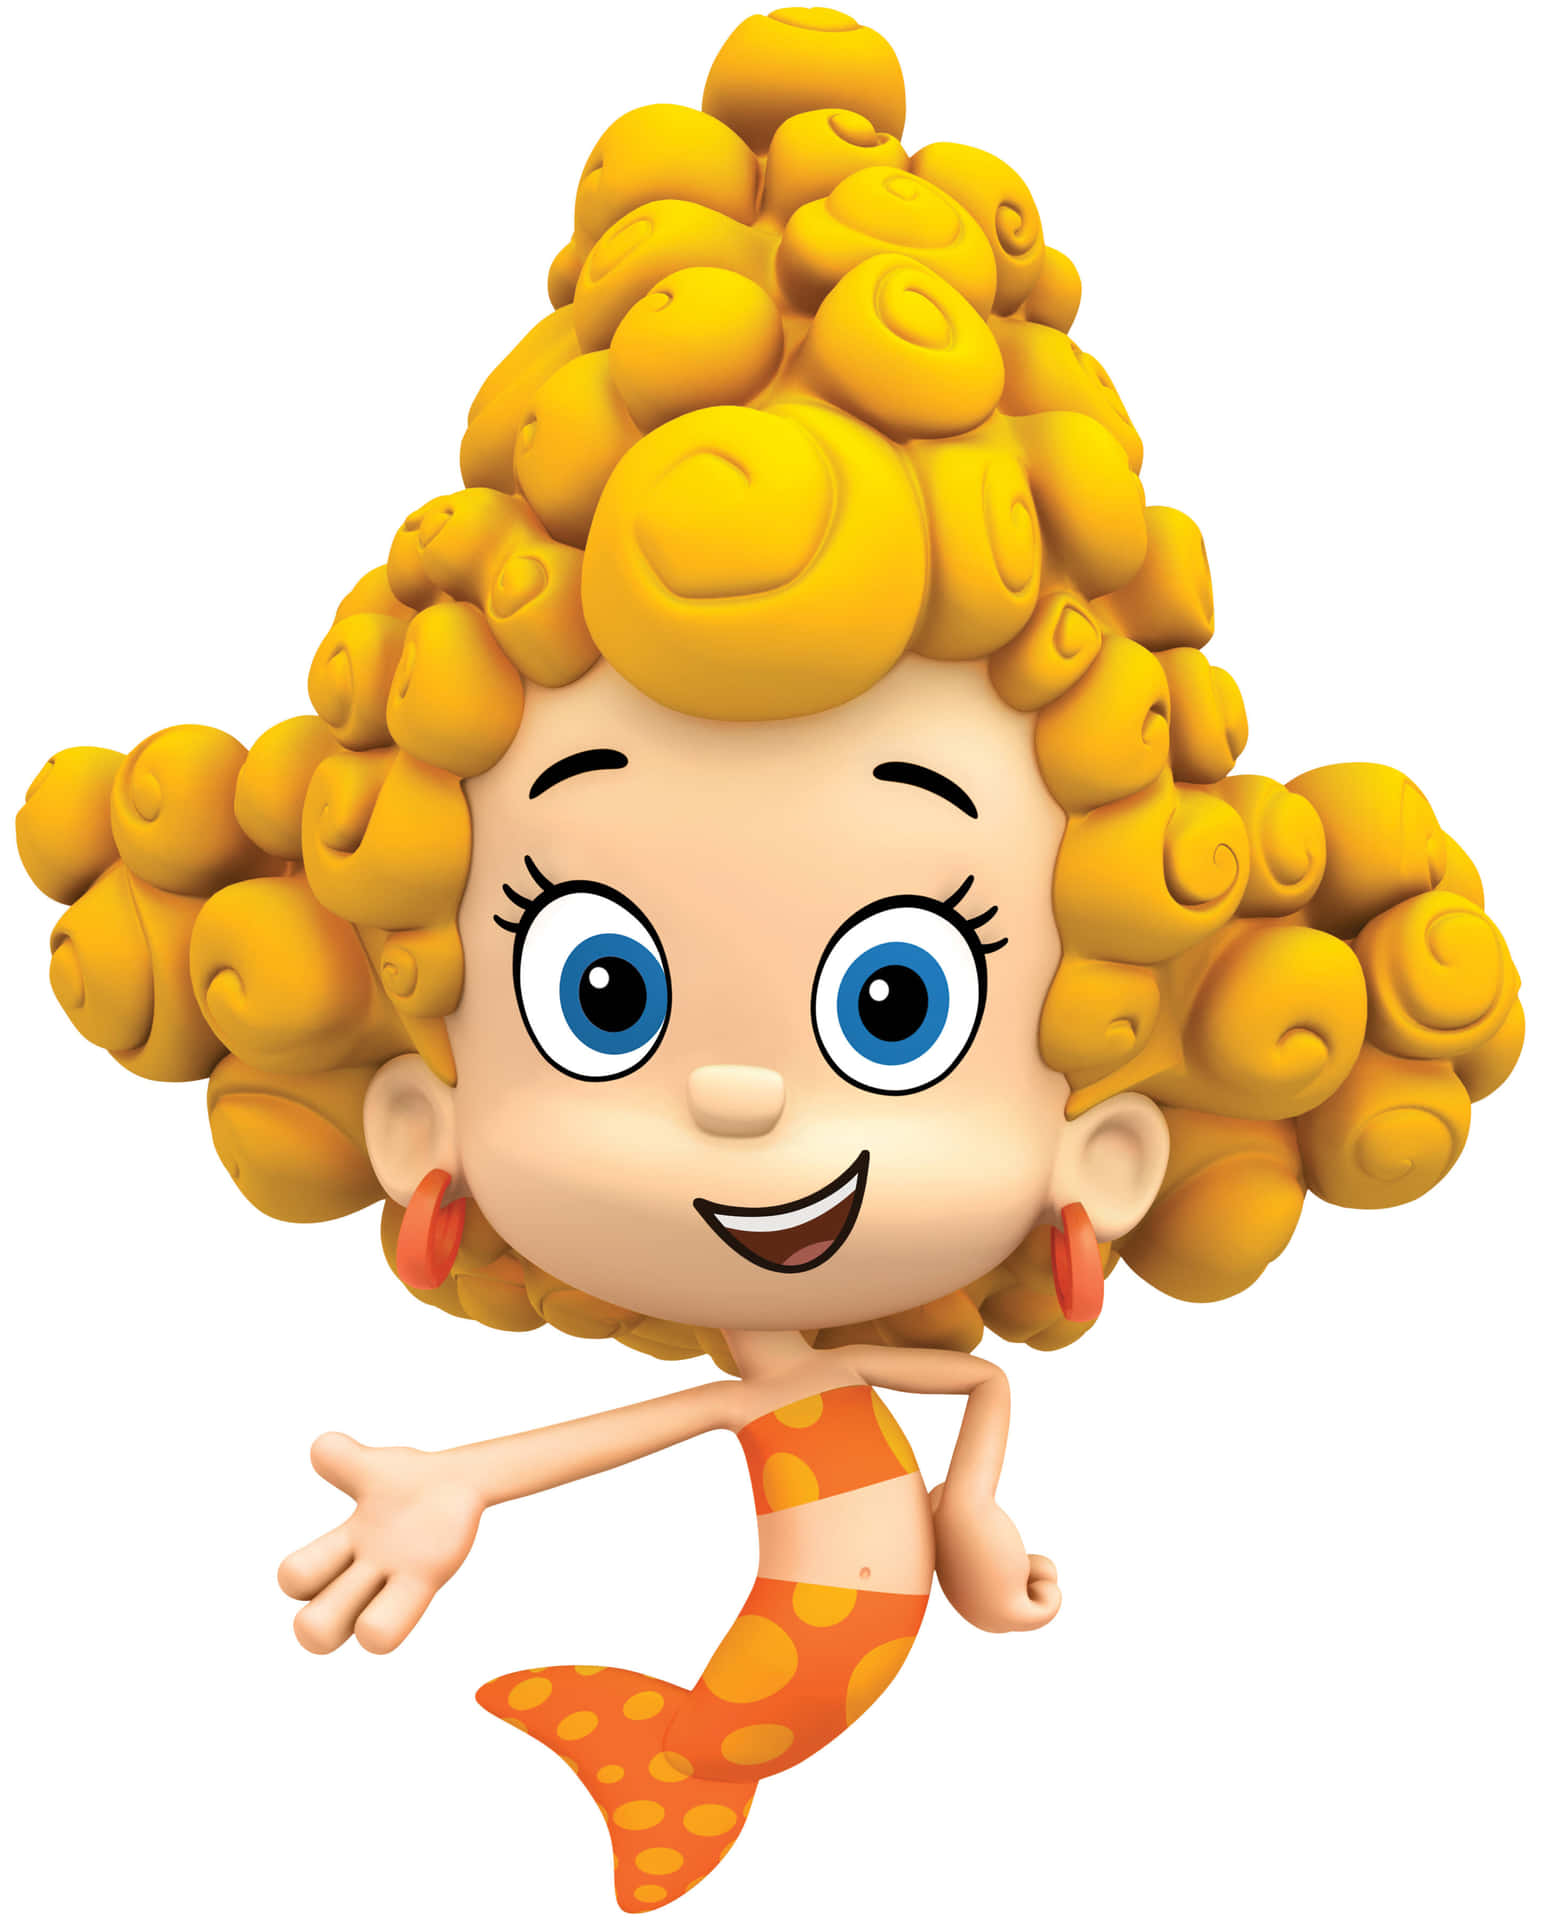 Enjoy the magic and fun with Bubble Guppies!